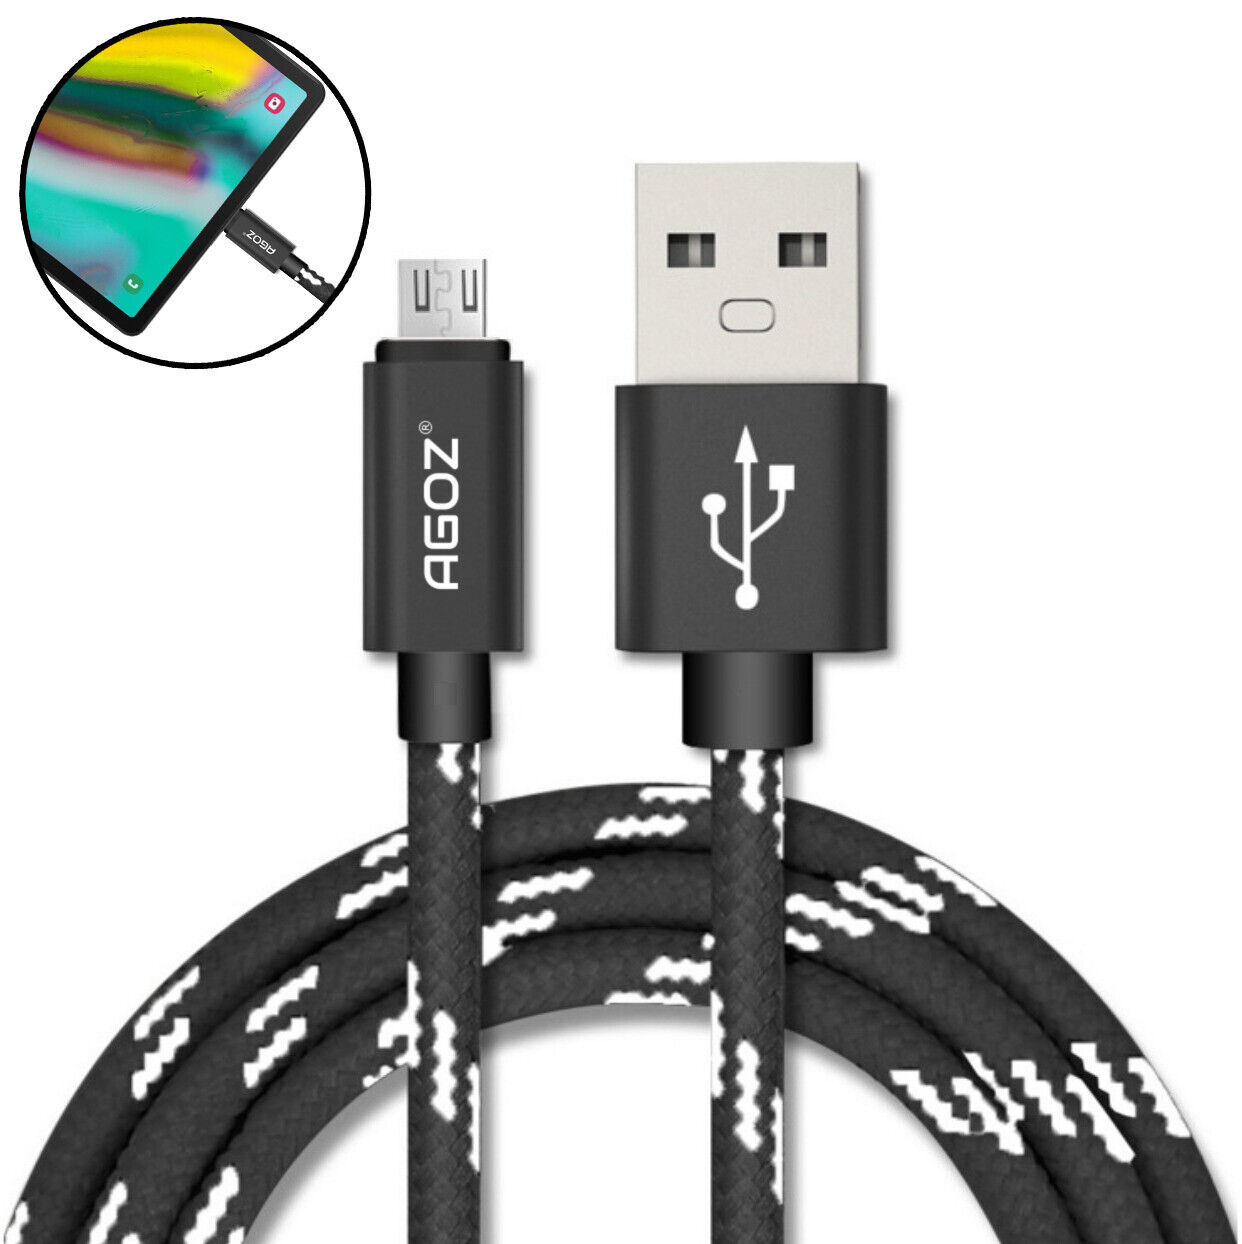 Micro USB FAST Charger Cable for Samsung Galaxy Tab, Lenovo, Verizon,Dell Tablet